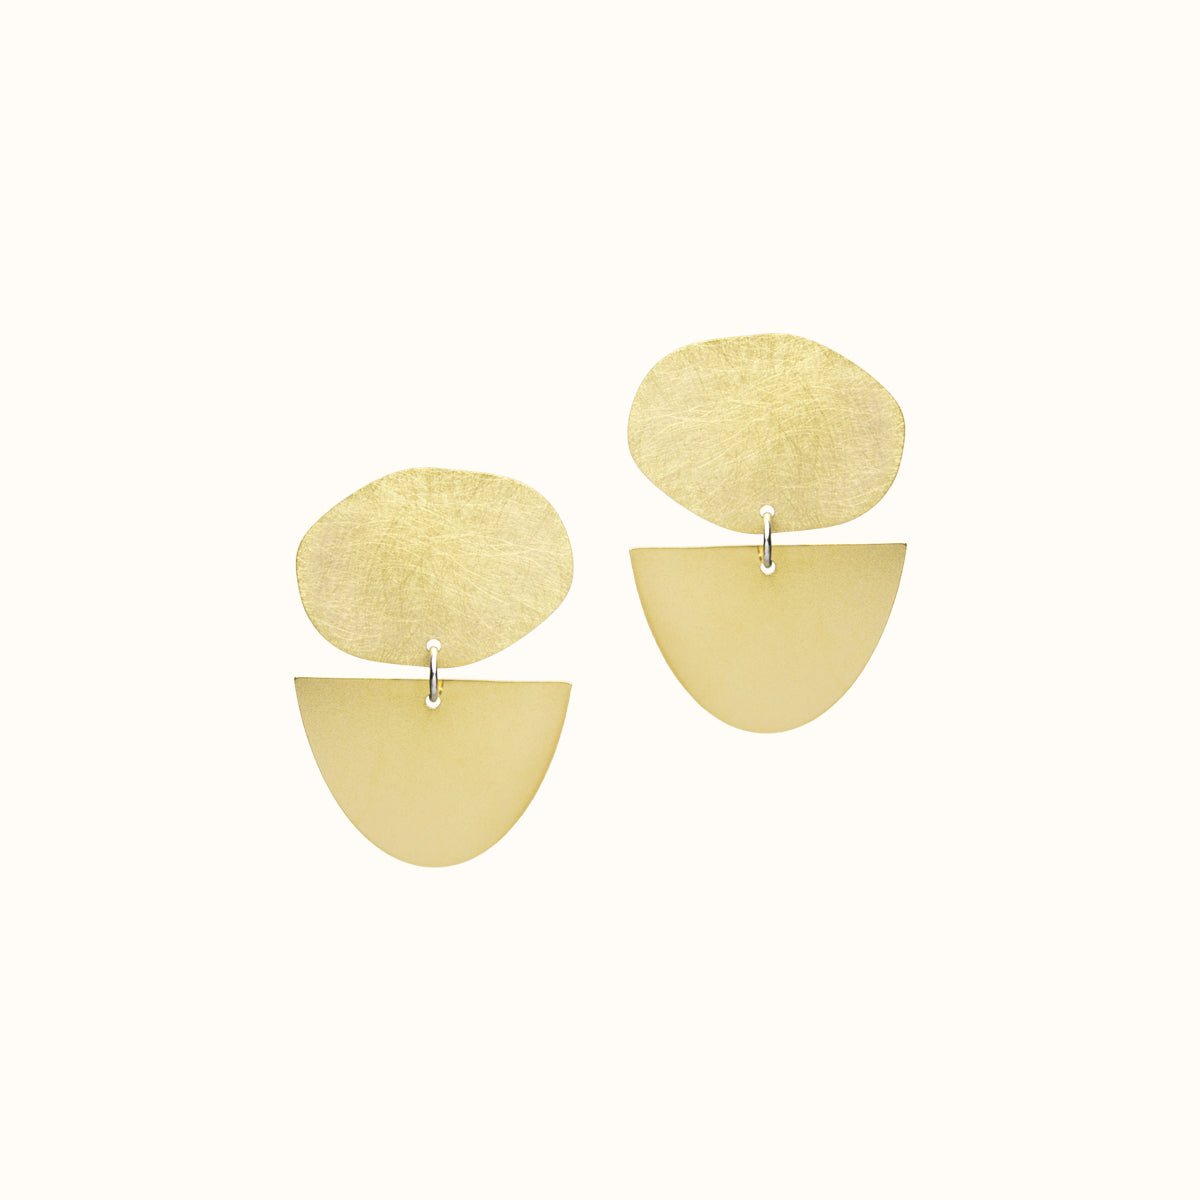 Ensem earrings in brush-finished and polished brass. Designed and handcrafted in Portland, Oregon.